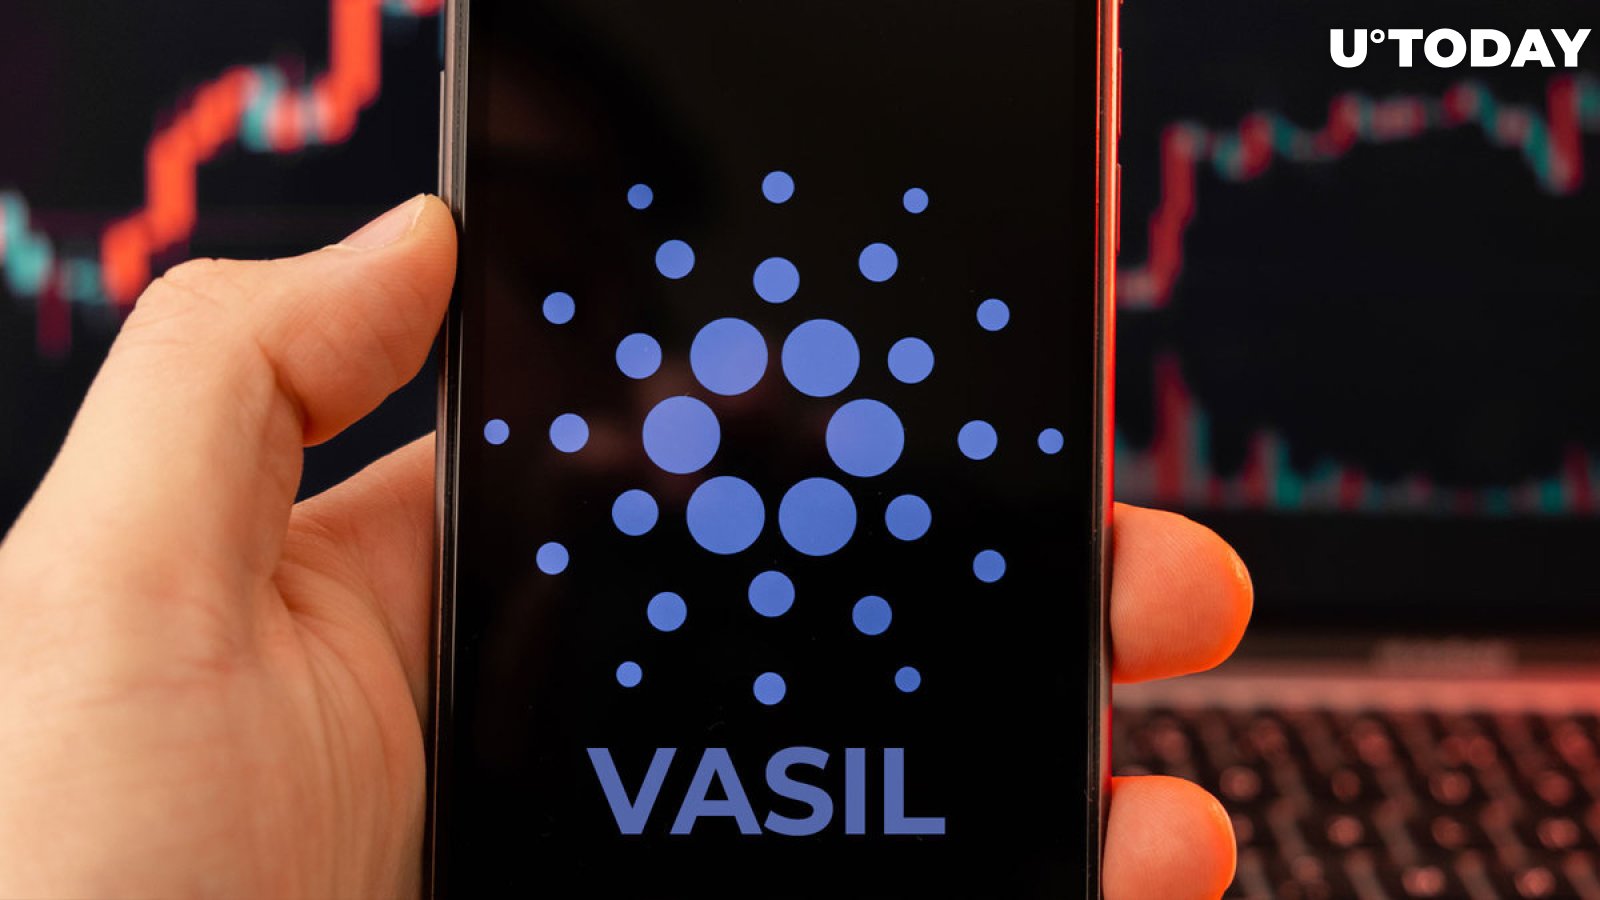 Cardano Users Can Now Track Vasil's Progress in Real Time on This Newly Launched Platform: Details